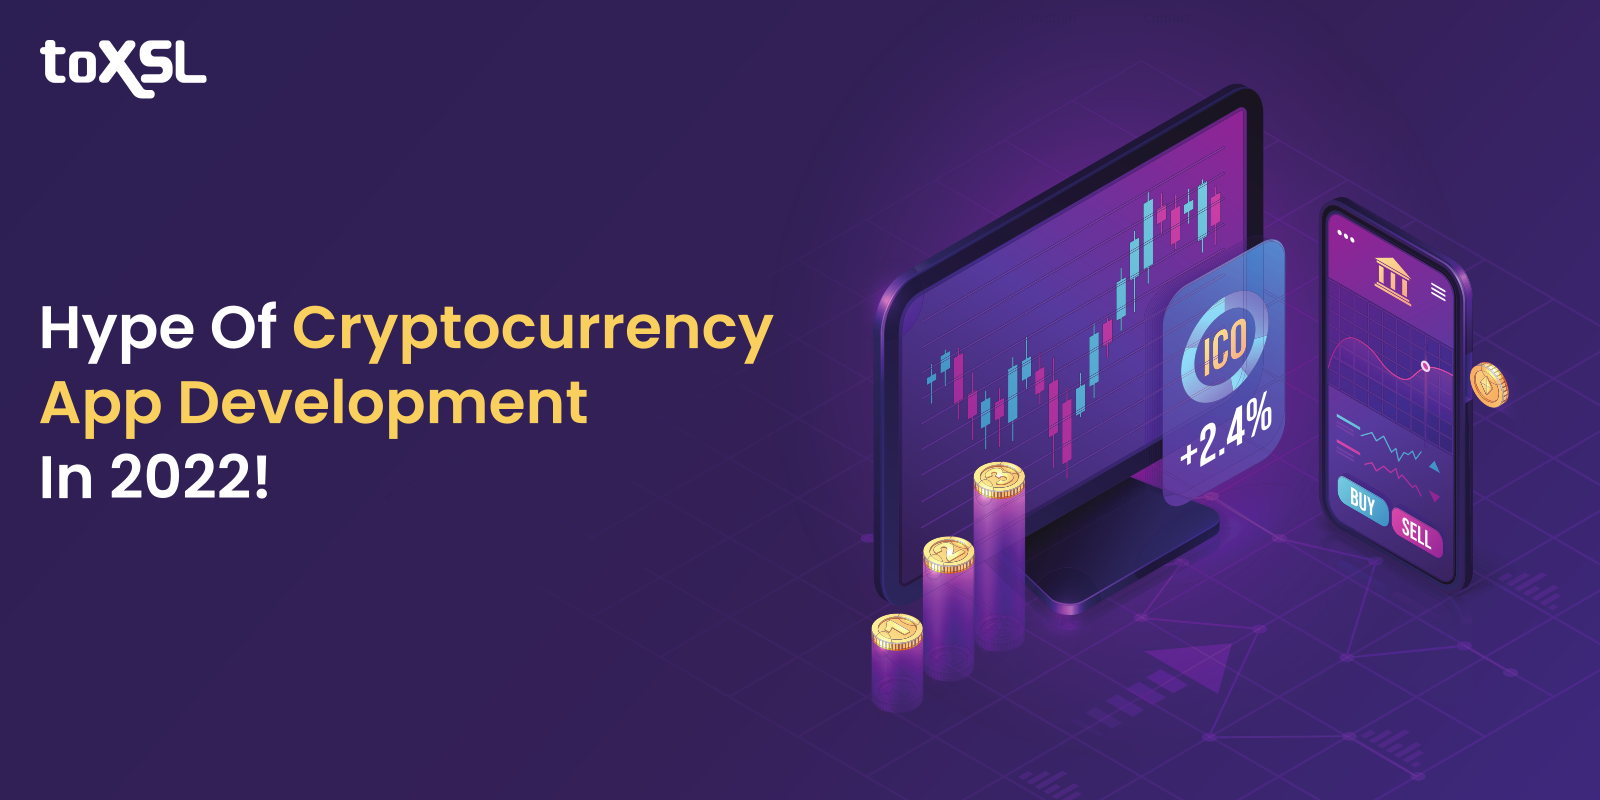 The Hype Of Cryptocurrency In 2022: Developing A Robust Trading App